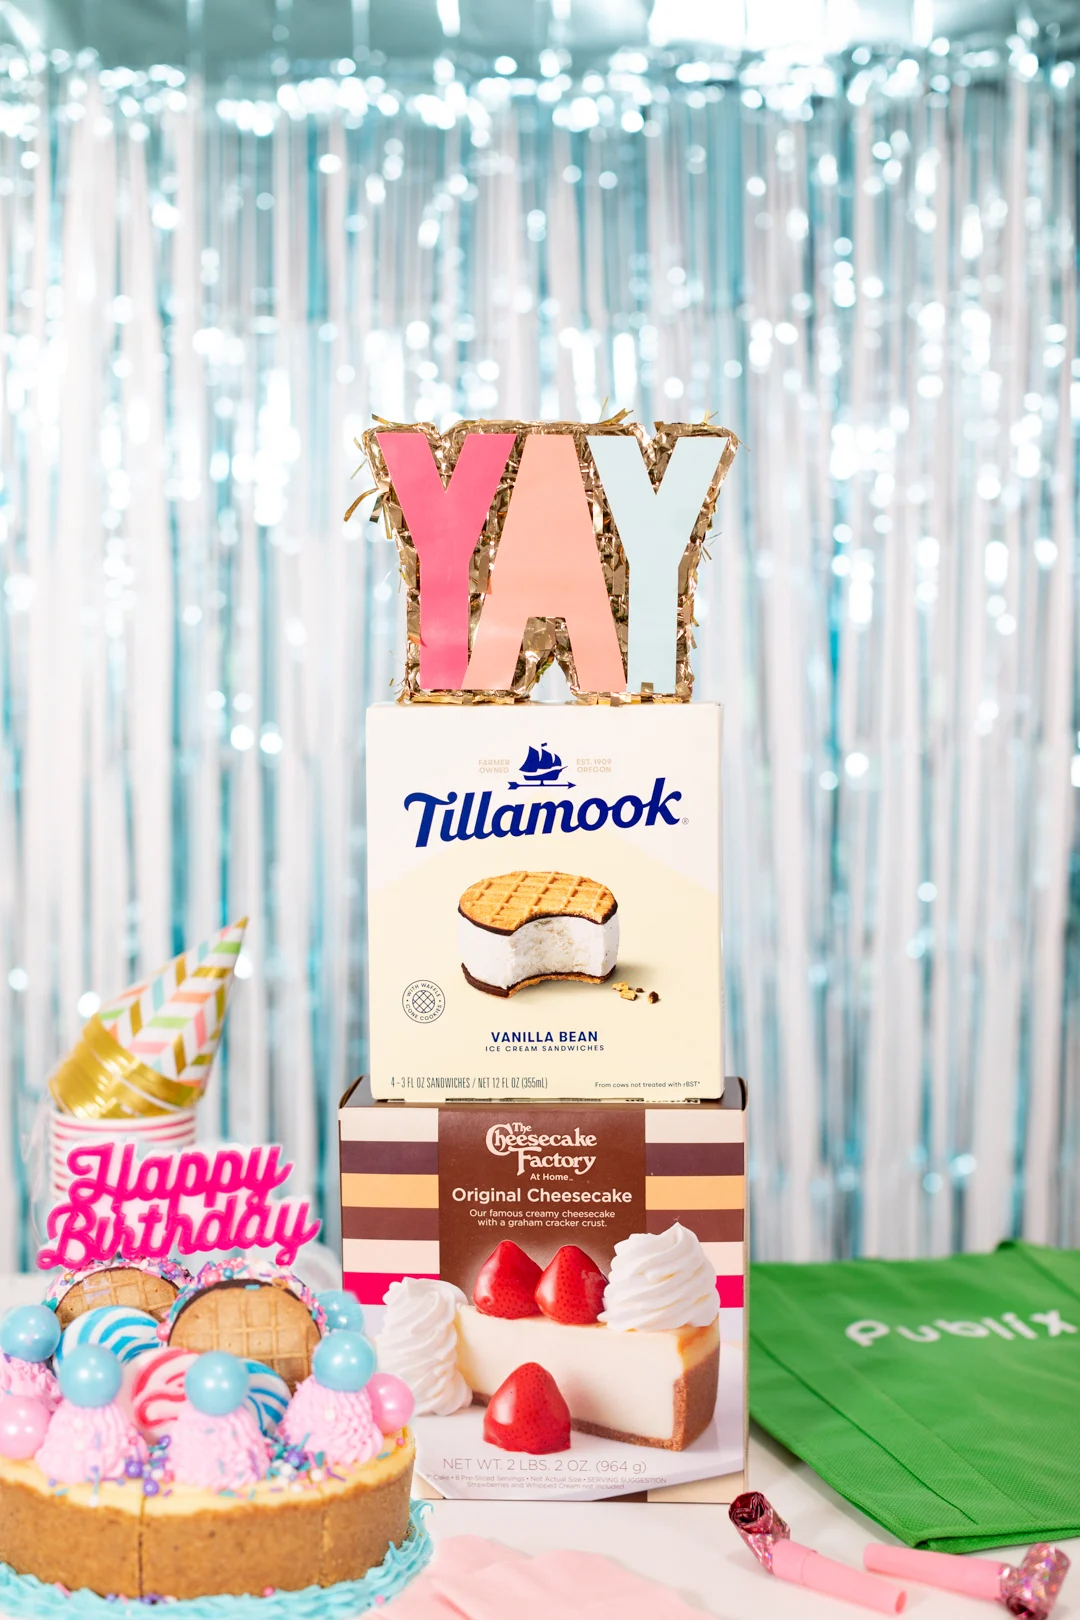 Tillamook ice cream sandwiches and cheesecake factory cheesecake and party supplies